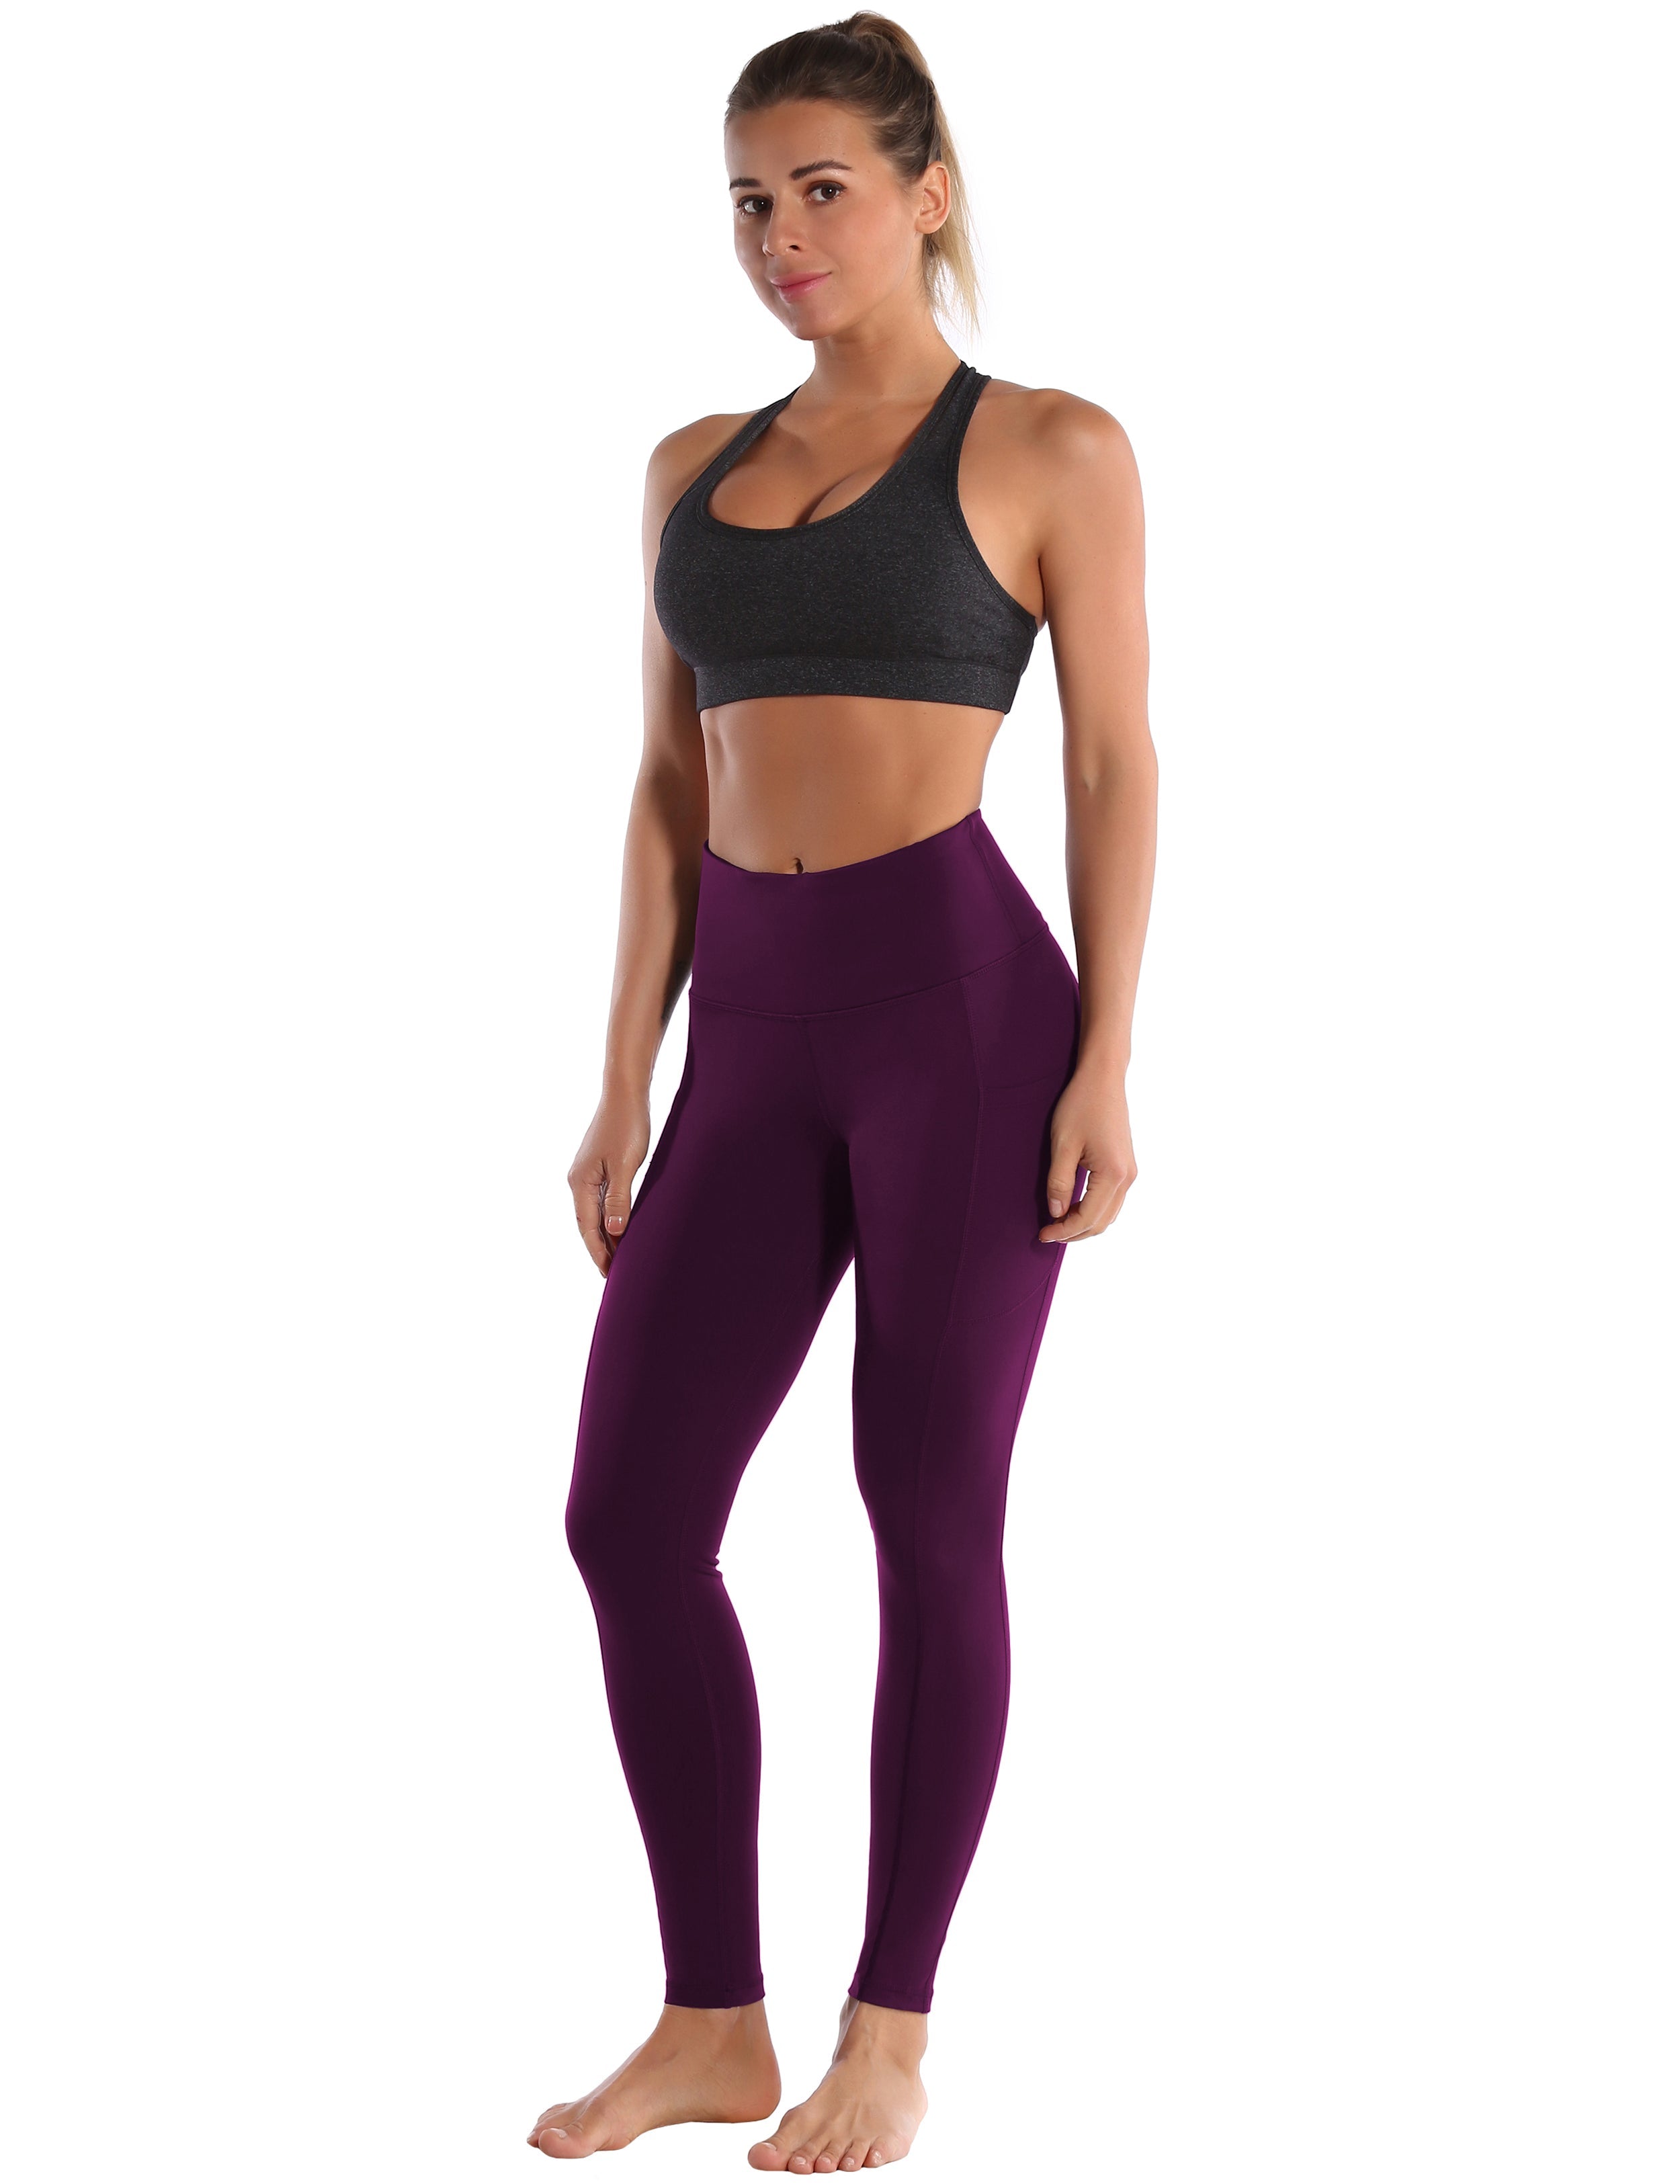 Hip Line Side Pockets Biking Pants grapevine Sexy Hip Line Side Pockets 75%Nylon/25%Spandex Fabric doesn't attract lint easily 4-way stretch No see-through Moisture-wicking Tummy control Inner pocket Two lengths